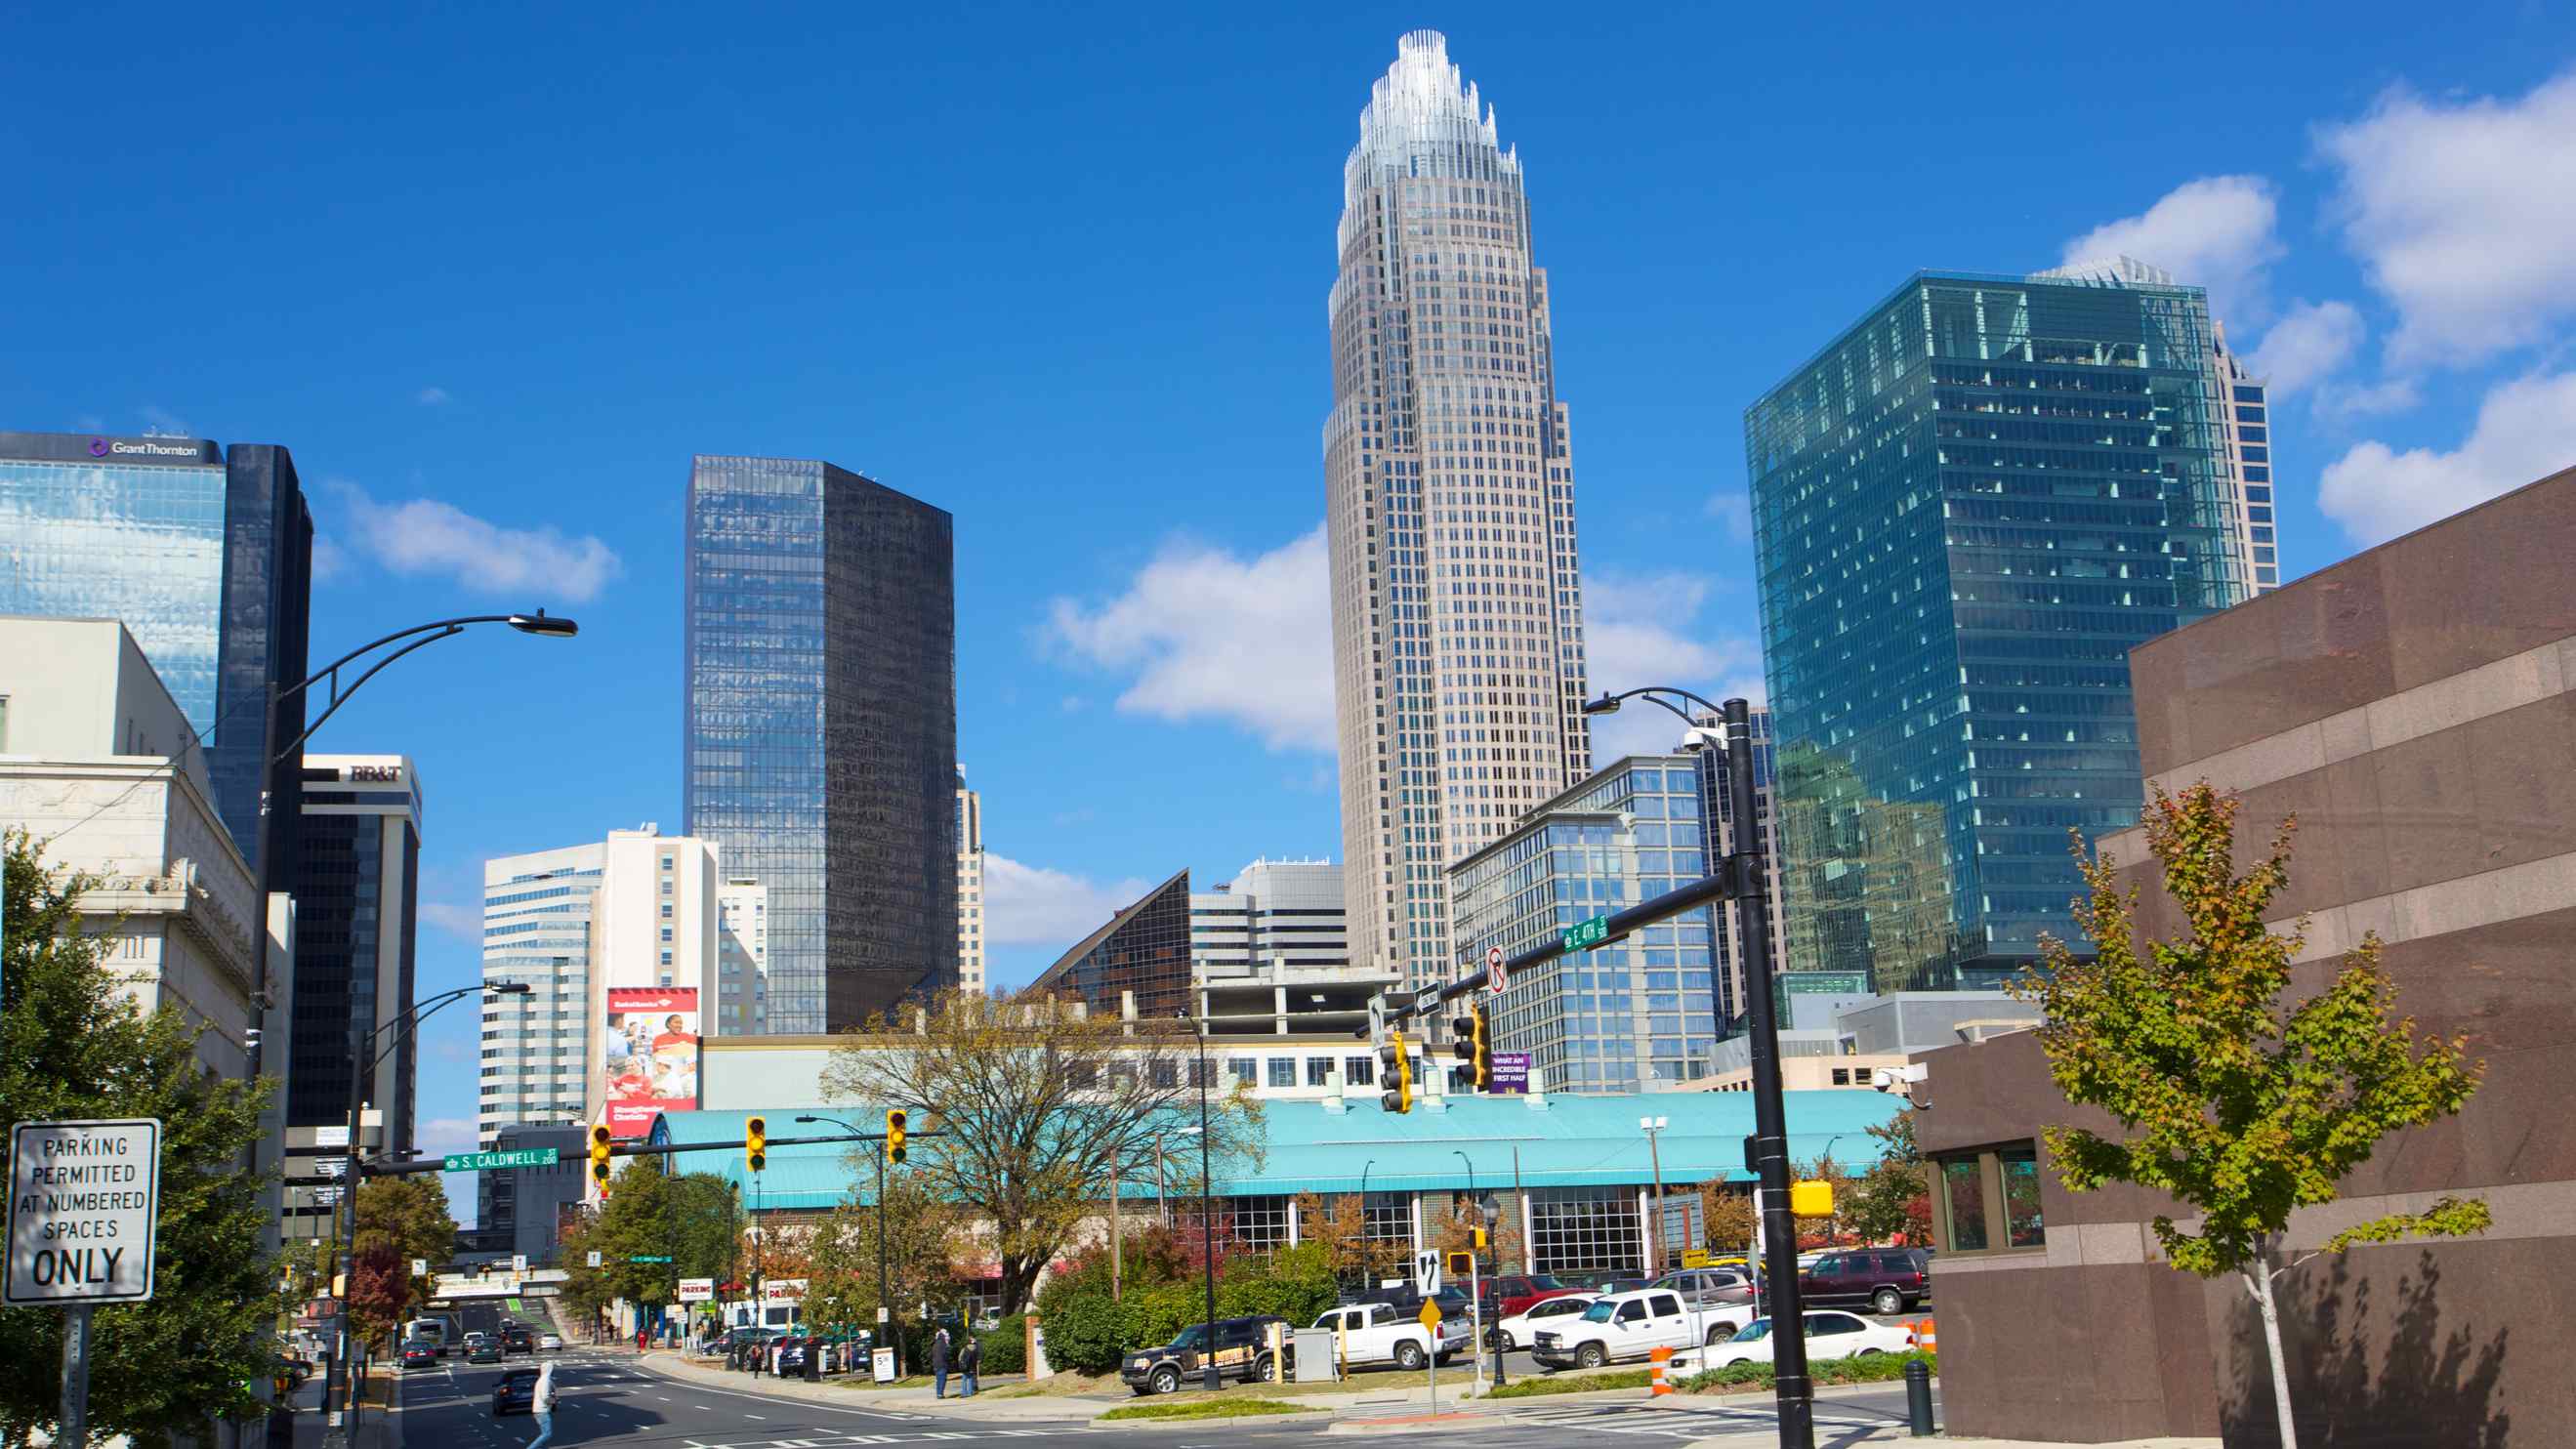 The 10 Top Charlotte Center City Hotels in 2018 | $67 Hotel Deals on ...